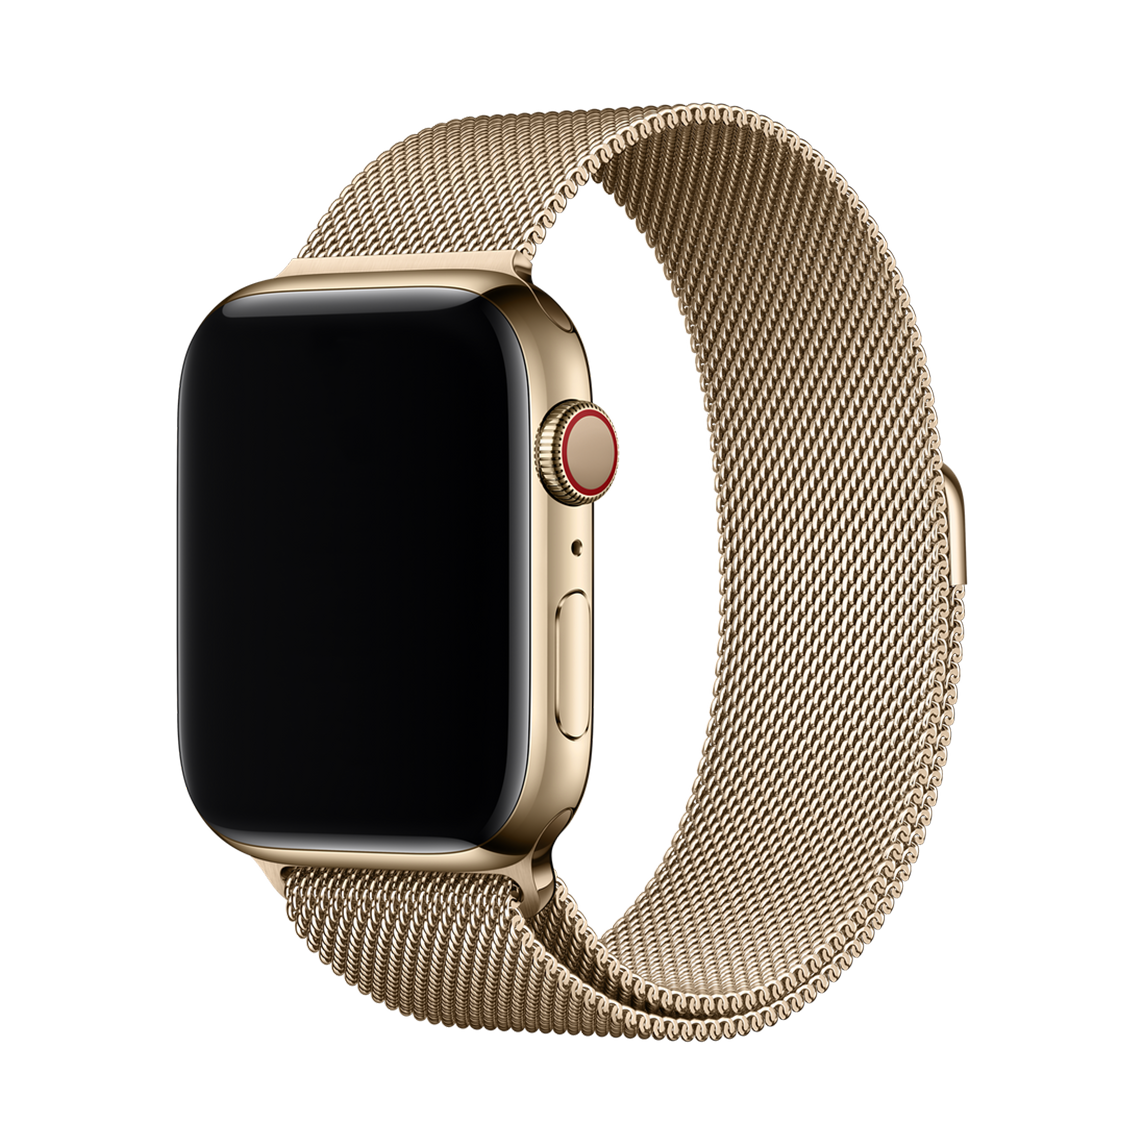 apple-watch-series-6-gold-stainless-steel-case-with-milanese-loop